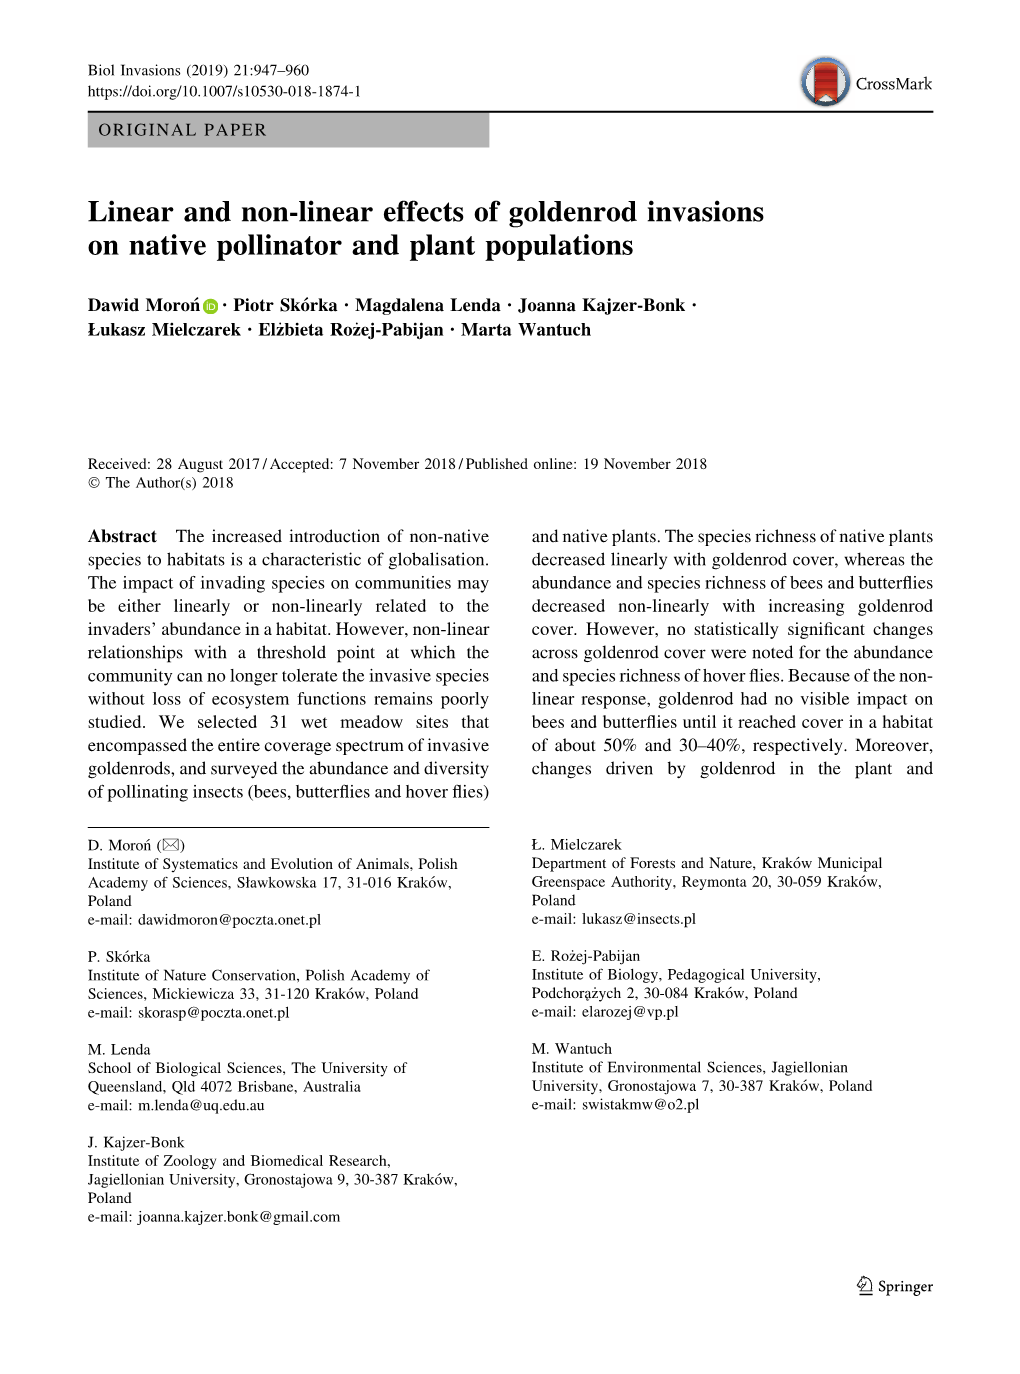 Linear and Non-Linear Effects of Goldenrod Invasions on Native Pollinator and Plant Populations